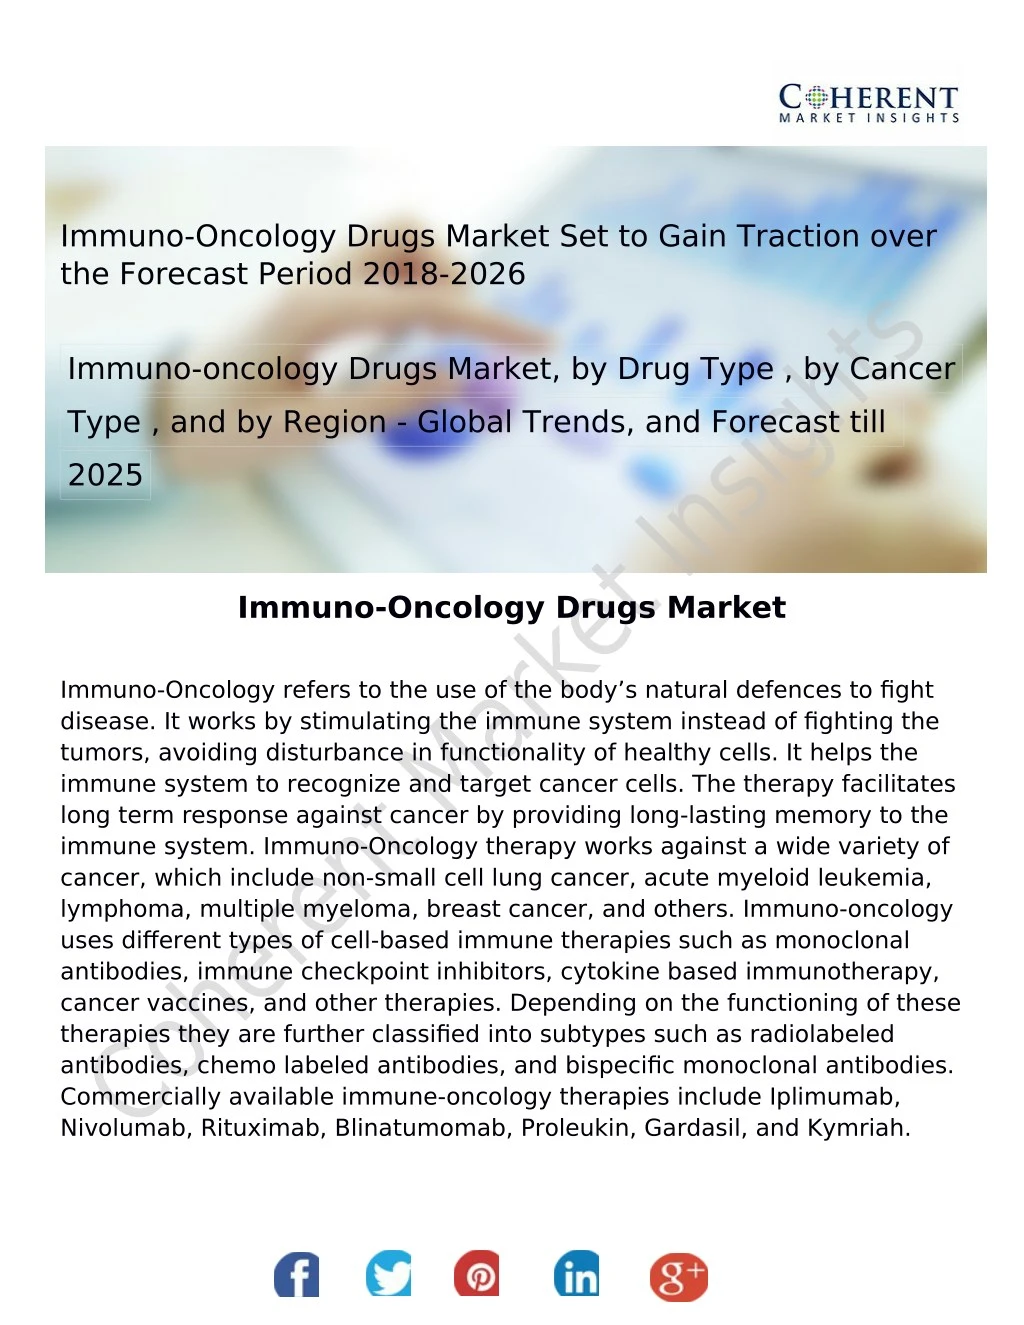 immuno oncology drugs market set to gain traction